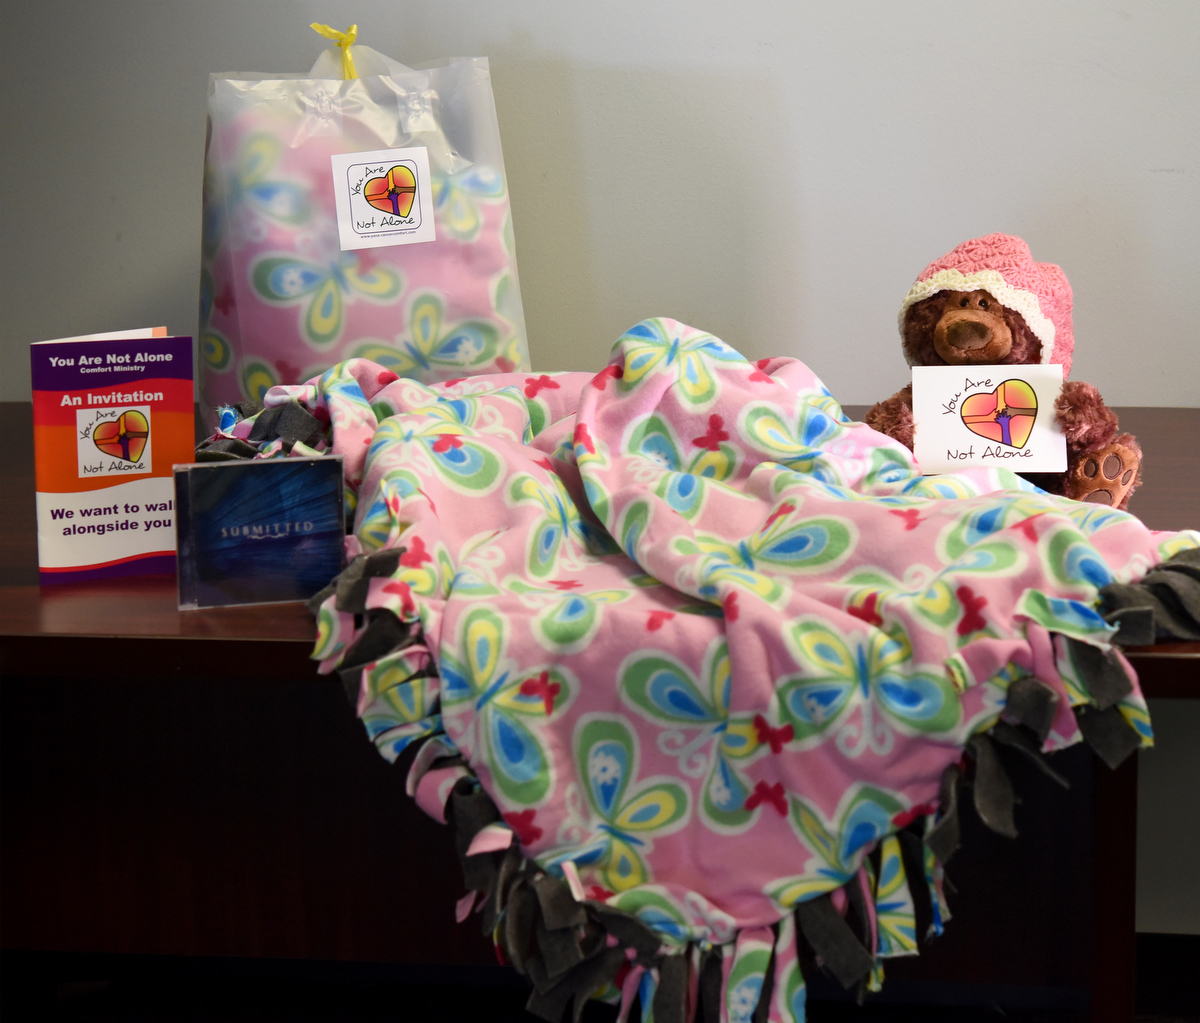 Care package for cancer patients (bear not included). Photo by Cindy Yamanaka, Orange County Register/SCNG